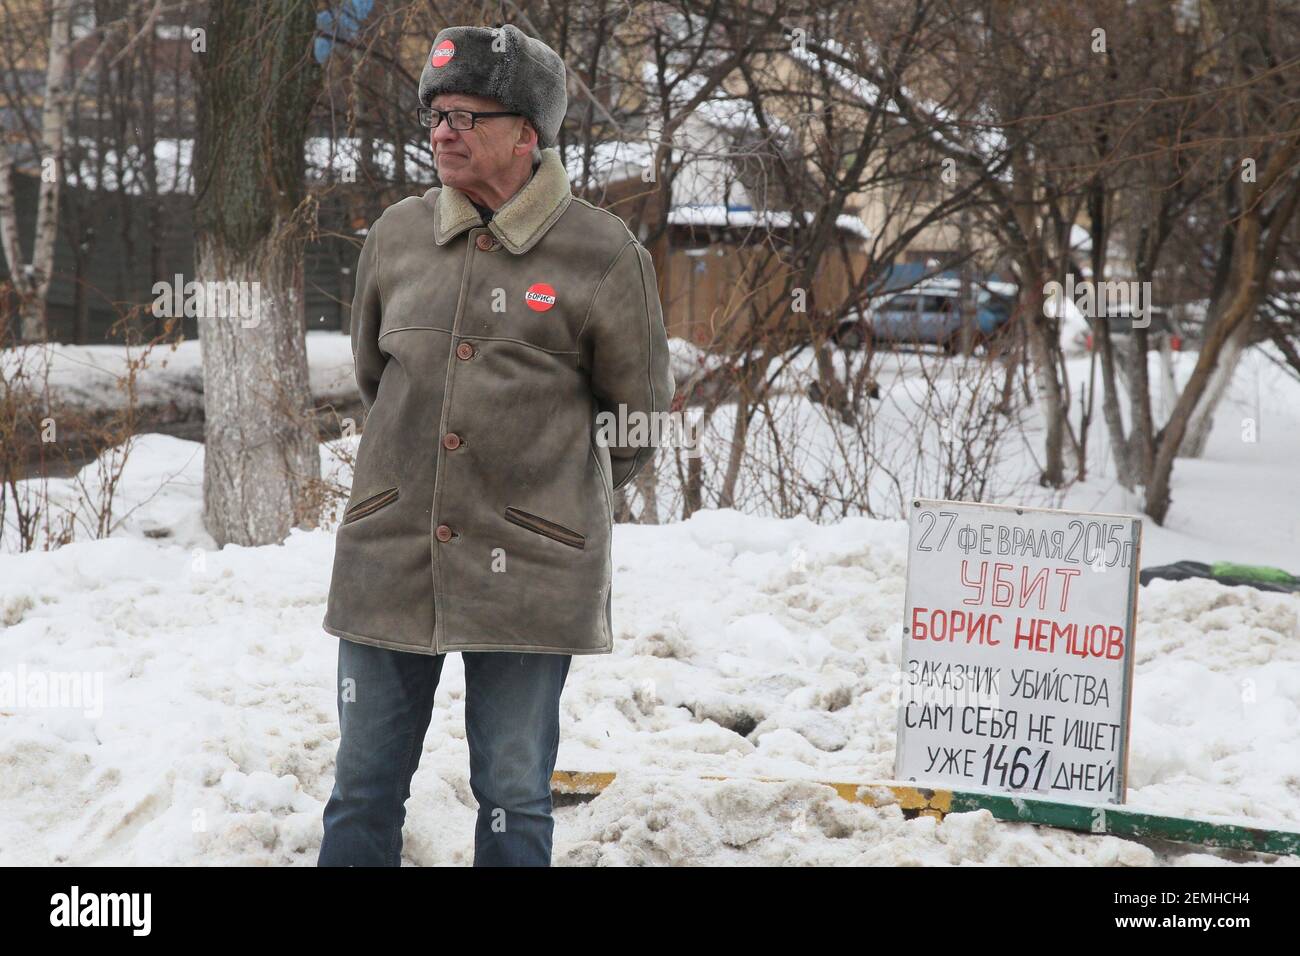 Opening of a memorial plaque on the Boris Nemtsov's house in Nizhny Novgorod. A man with a poster: 'The contract killer has not made a search for himself for 1461 days.' February 27, 2019. Russia, Nizhny Novgorod. Photo credit: Roman Yarovitsin/Kommersant/Sipa USA  Stock Photo